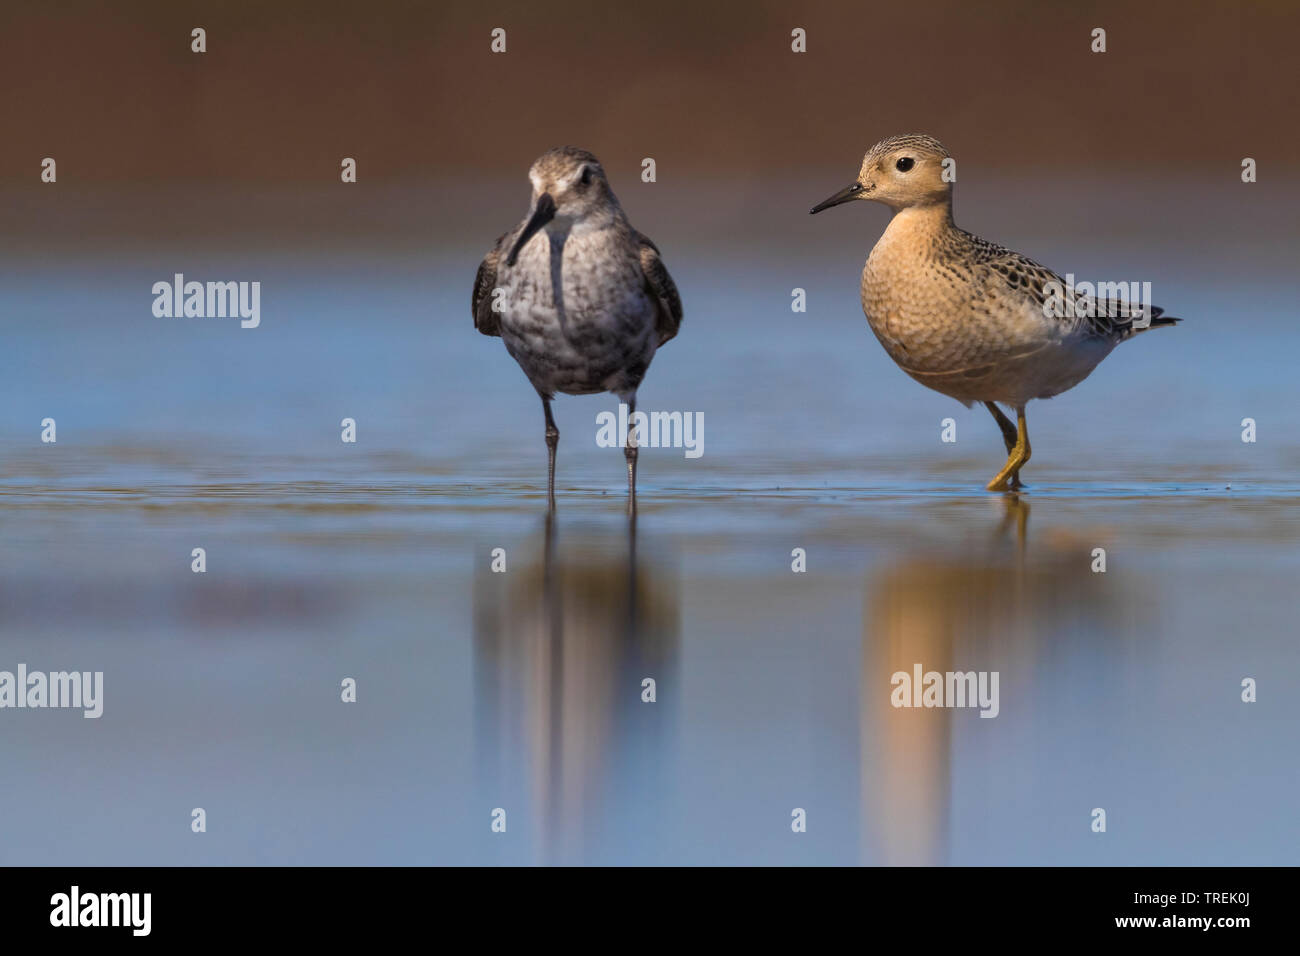 buff-breasted sandpiper (Tryngites subruficollis), standing in shallow water with dunlin, Calidris alpina, Italy, Leghorn Stock Photo